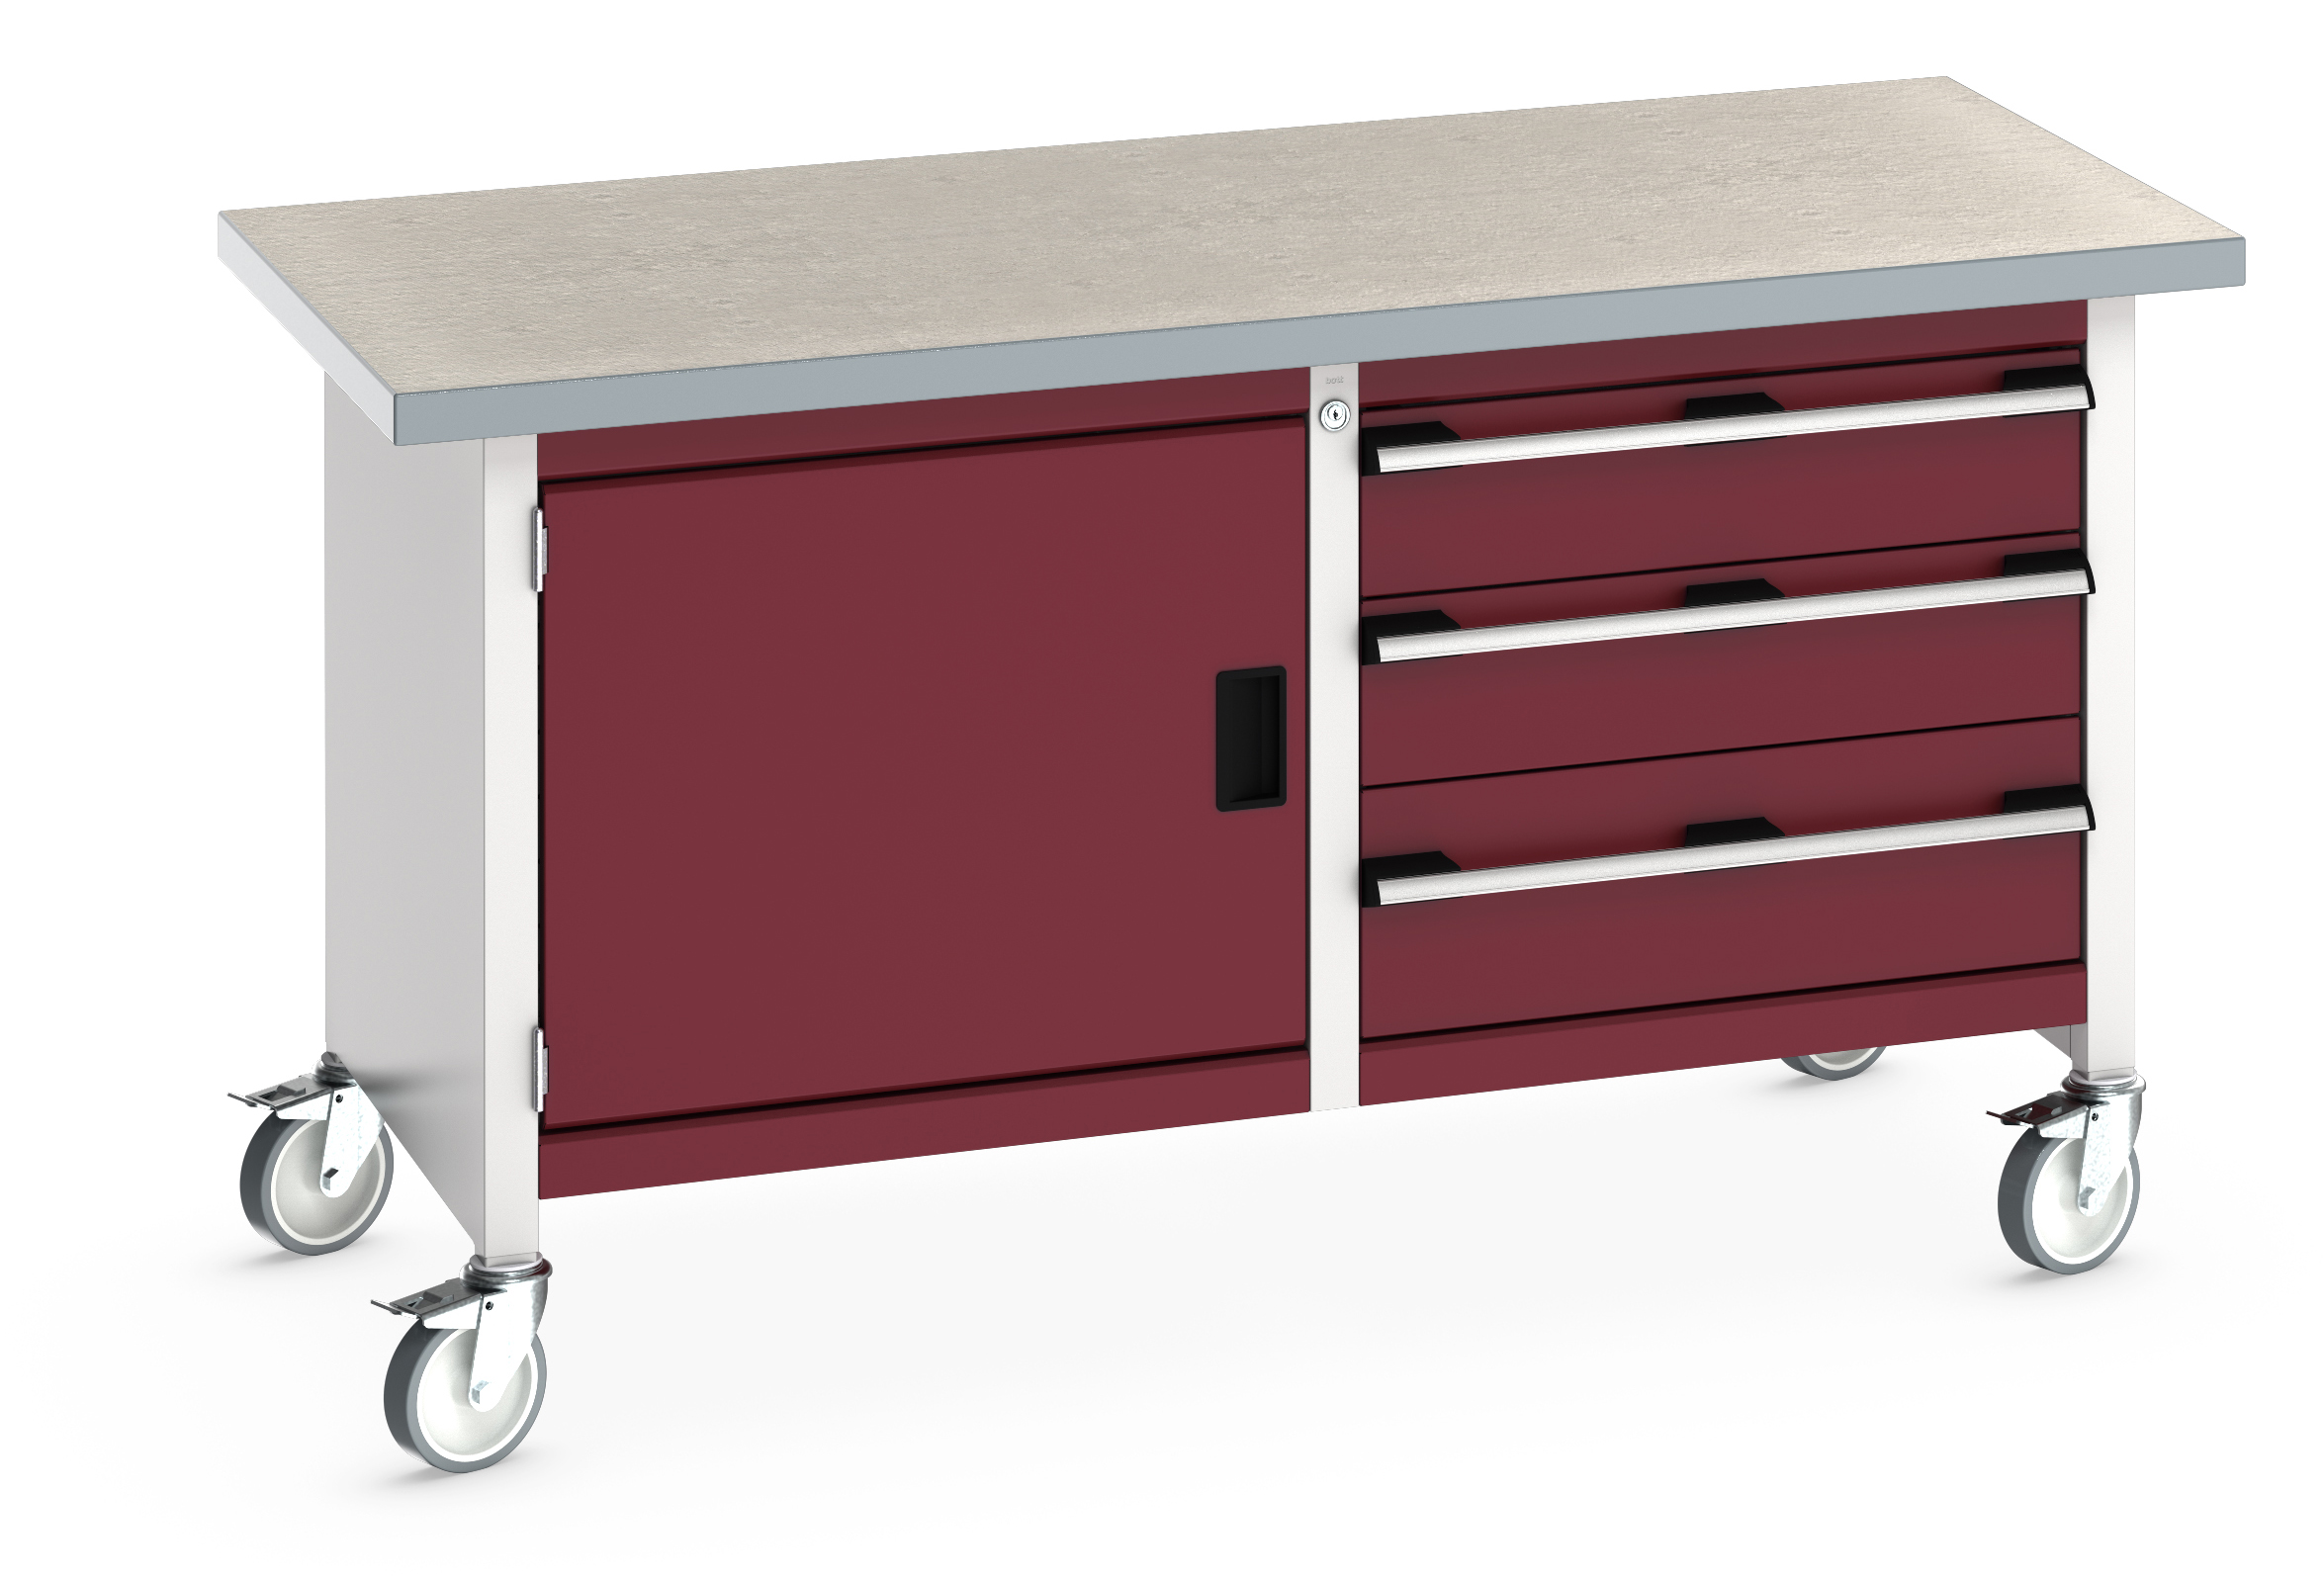 Bott Cubio Mobile Storage Bench With Full Cupboard / 3 Drawer Cabinet - 41002102.24V